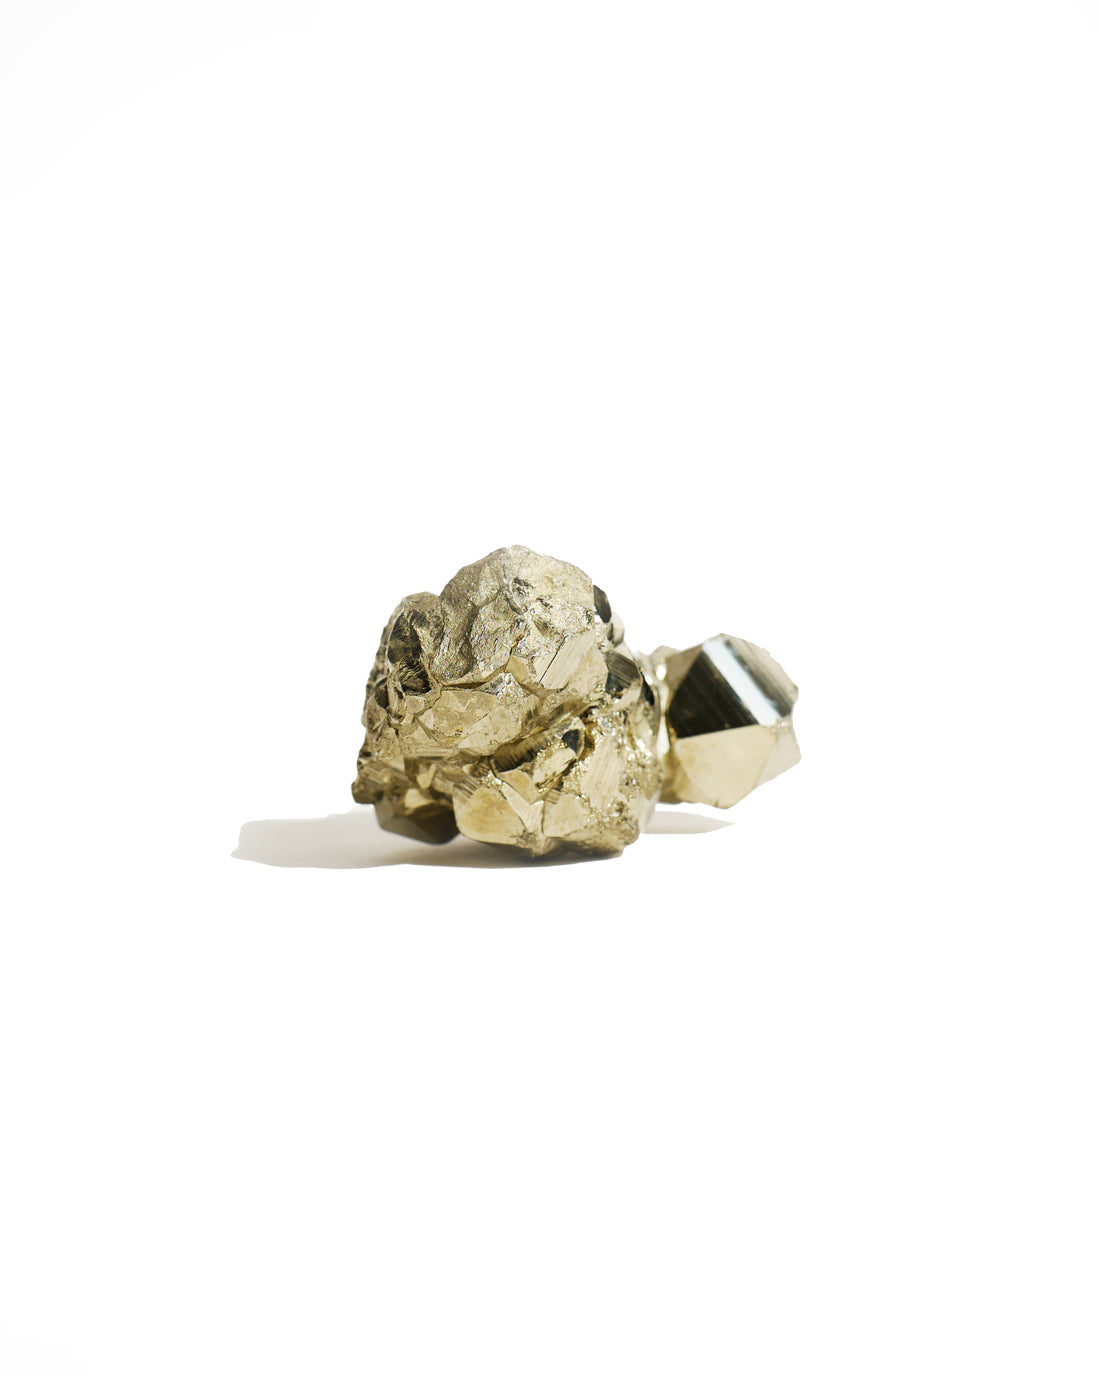 Pyrite in Raw